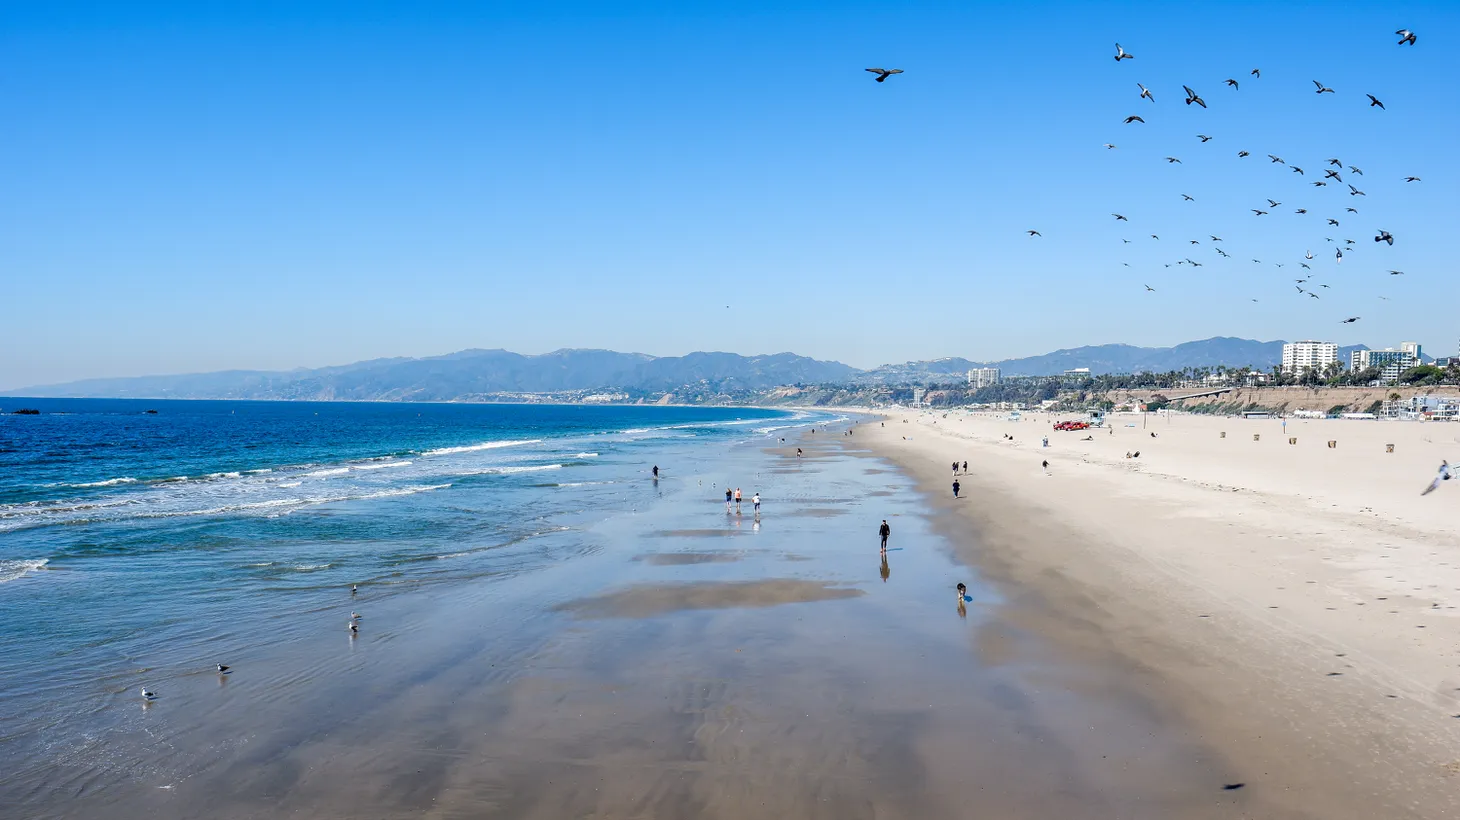 Santa Monica beach is seen on a clear day, February 25, 2022. The air is cleaner than in the past — South Coast Air Quality Management District says ozone levels are at less than half of what they were in the 1950s.